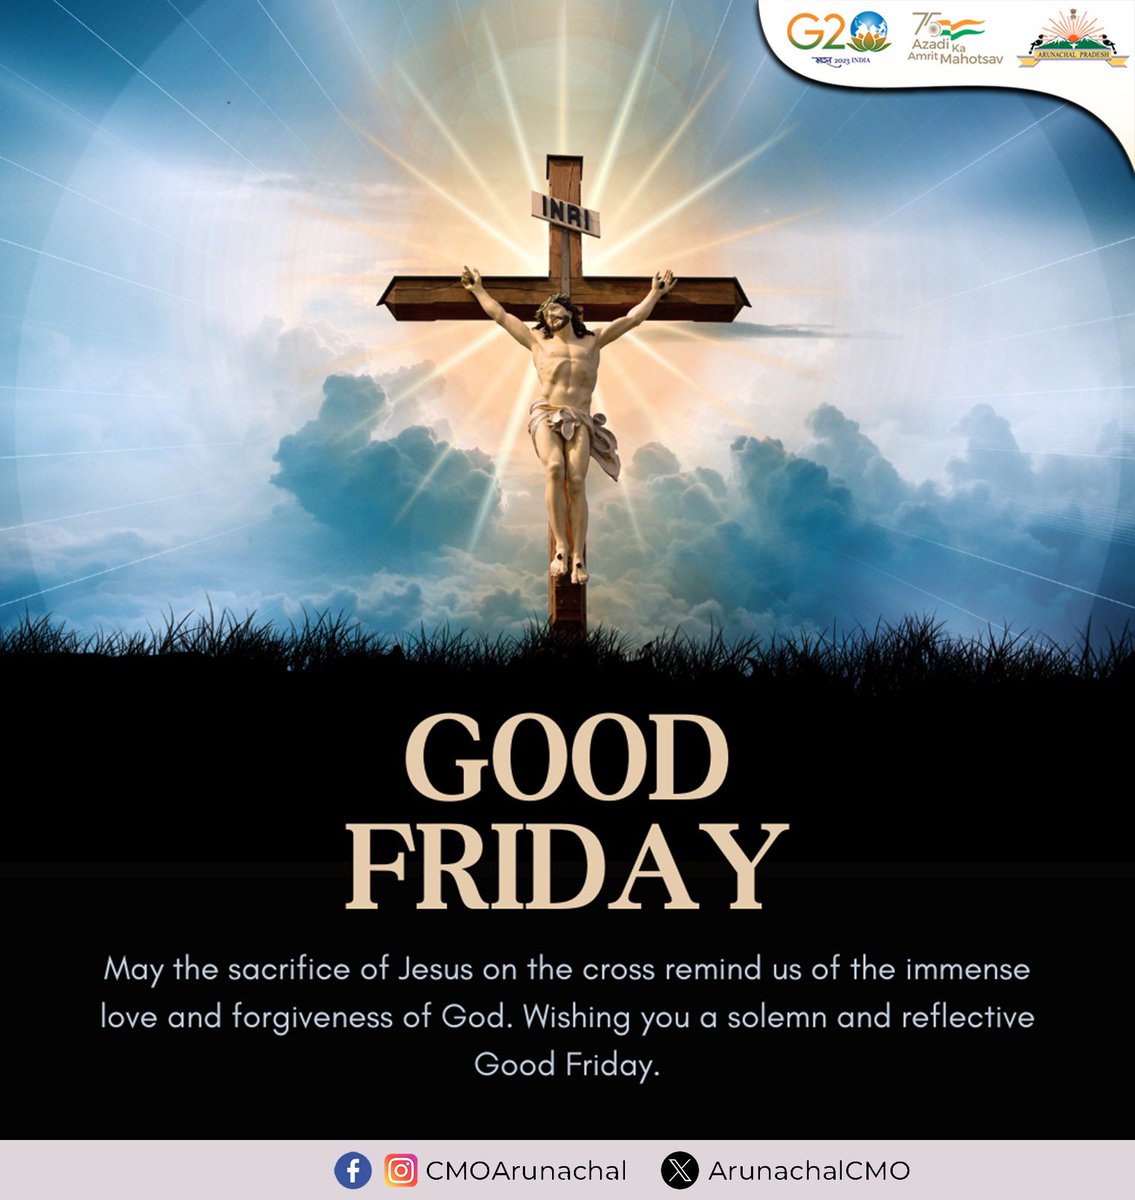 On this solemn day of #GoodFriday, let's reflect on the profound sacrifice and boundless love demonstrated by Jesus Christ. May this day inspire compassion, forgiveness, and renewal in our hearts and communities. Wishing peace and blessings to all observing this sacred occasion.